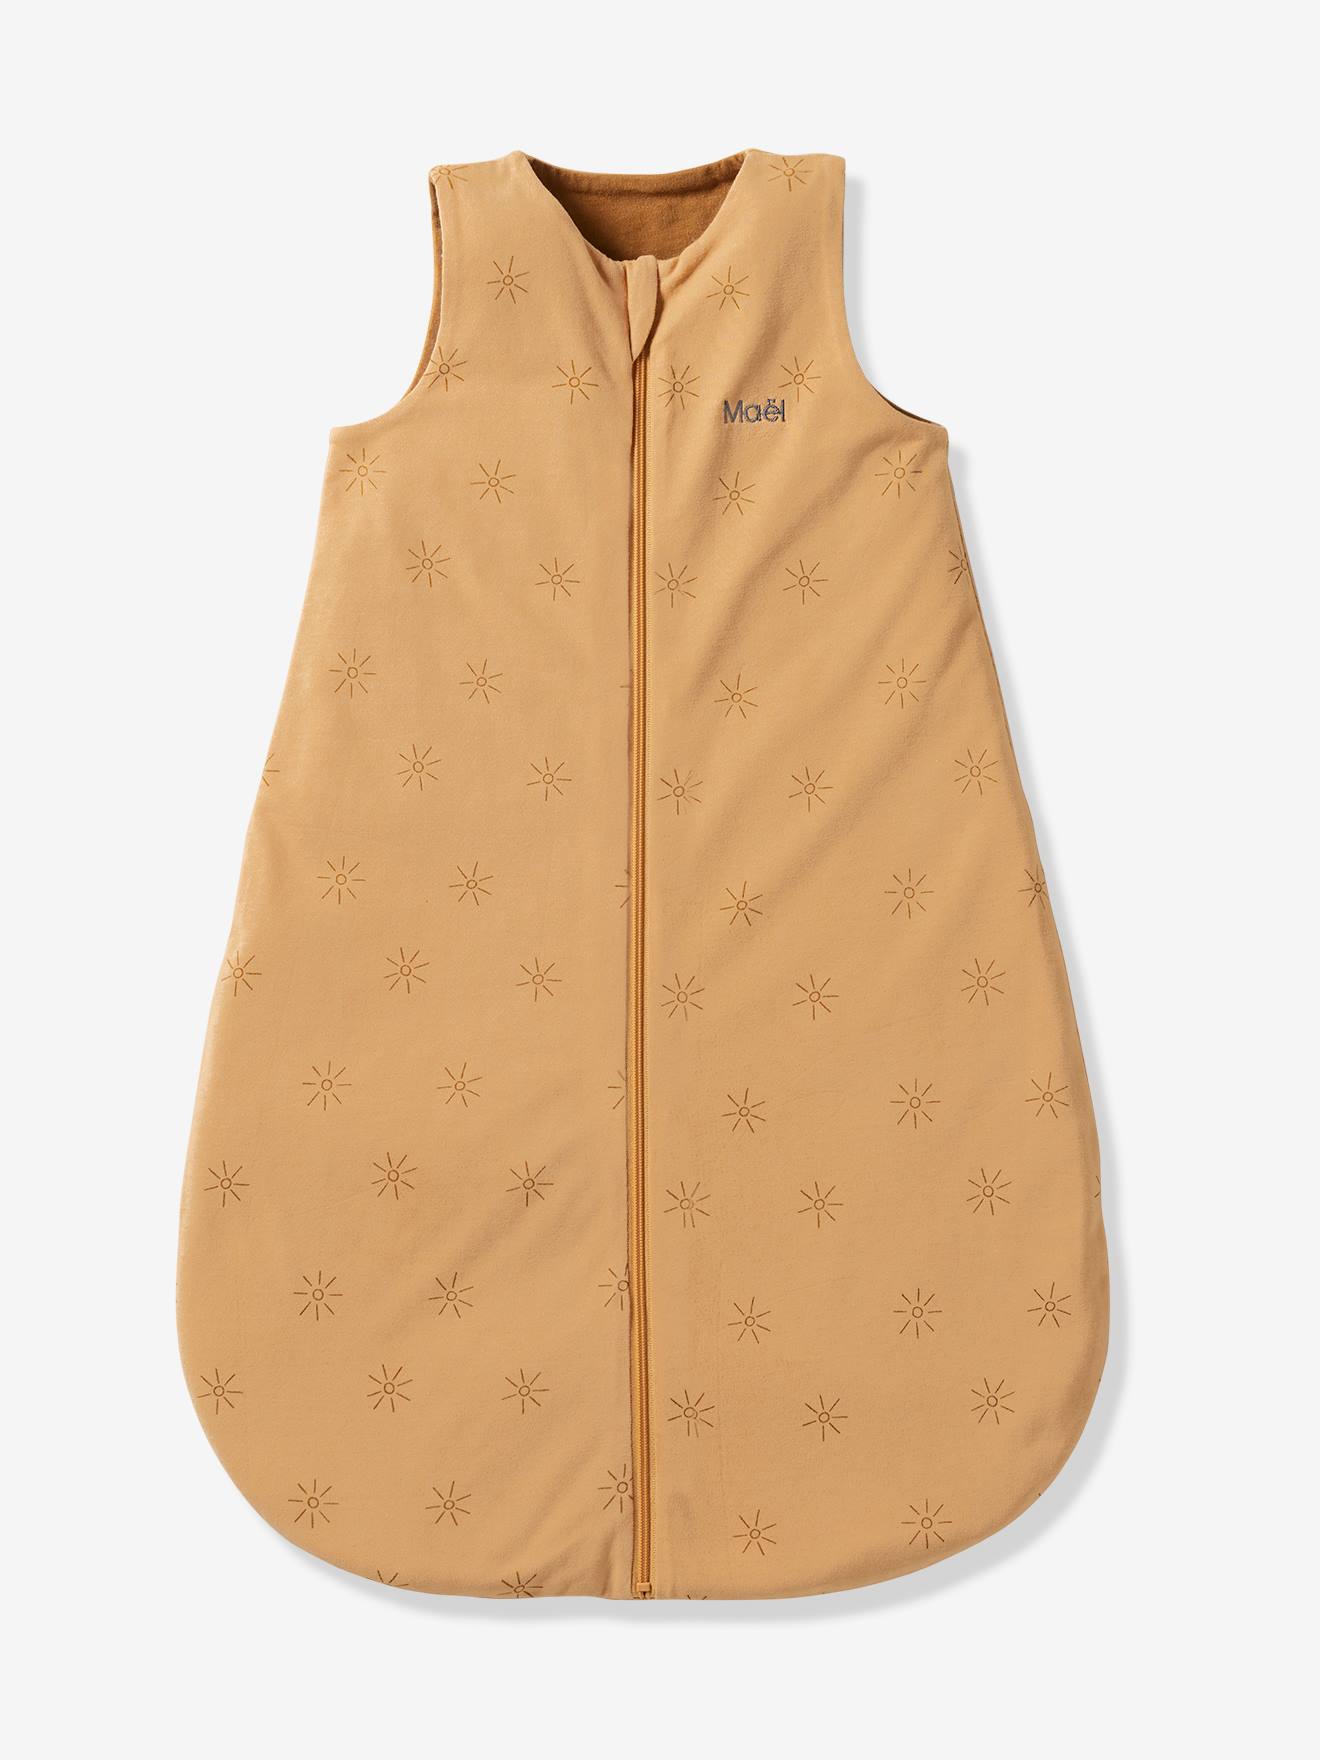 Essentials Summer Special Baby Sleeping Bag, Opens in the Middle, Bali printed yellow